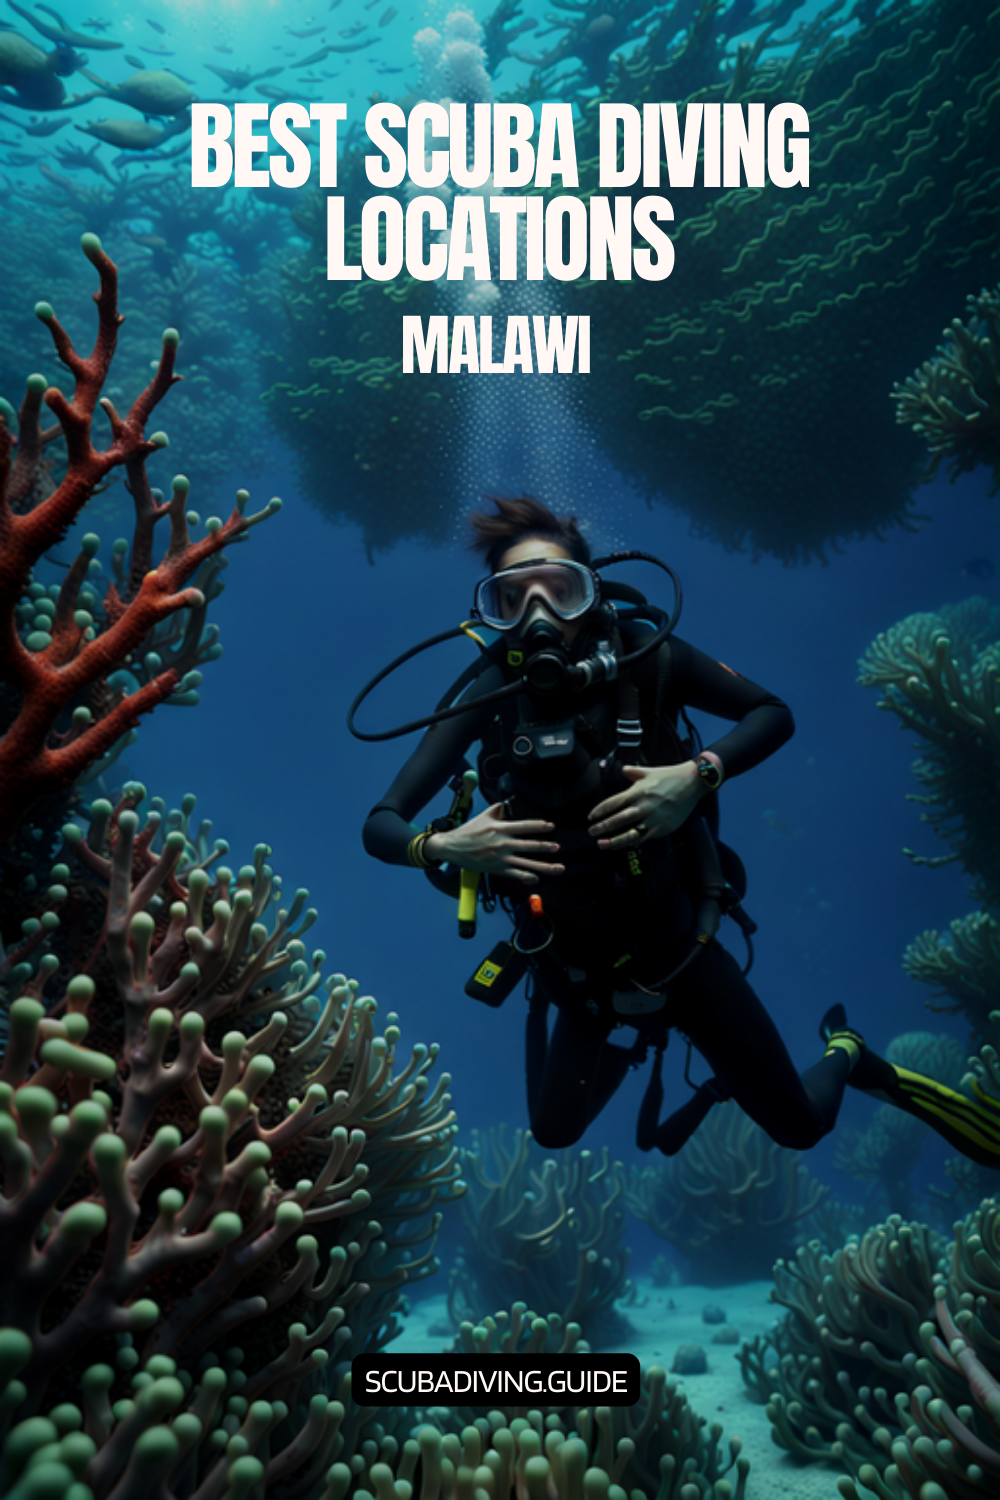 Scuba Diving Locations in Malawi